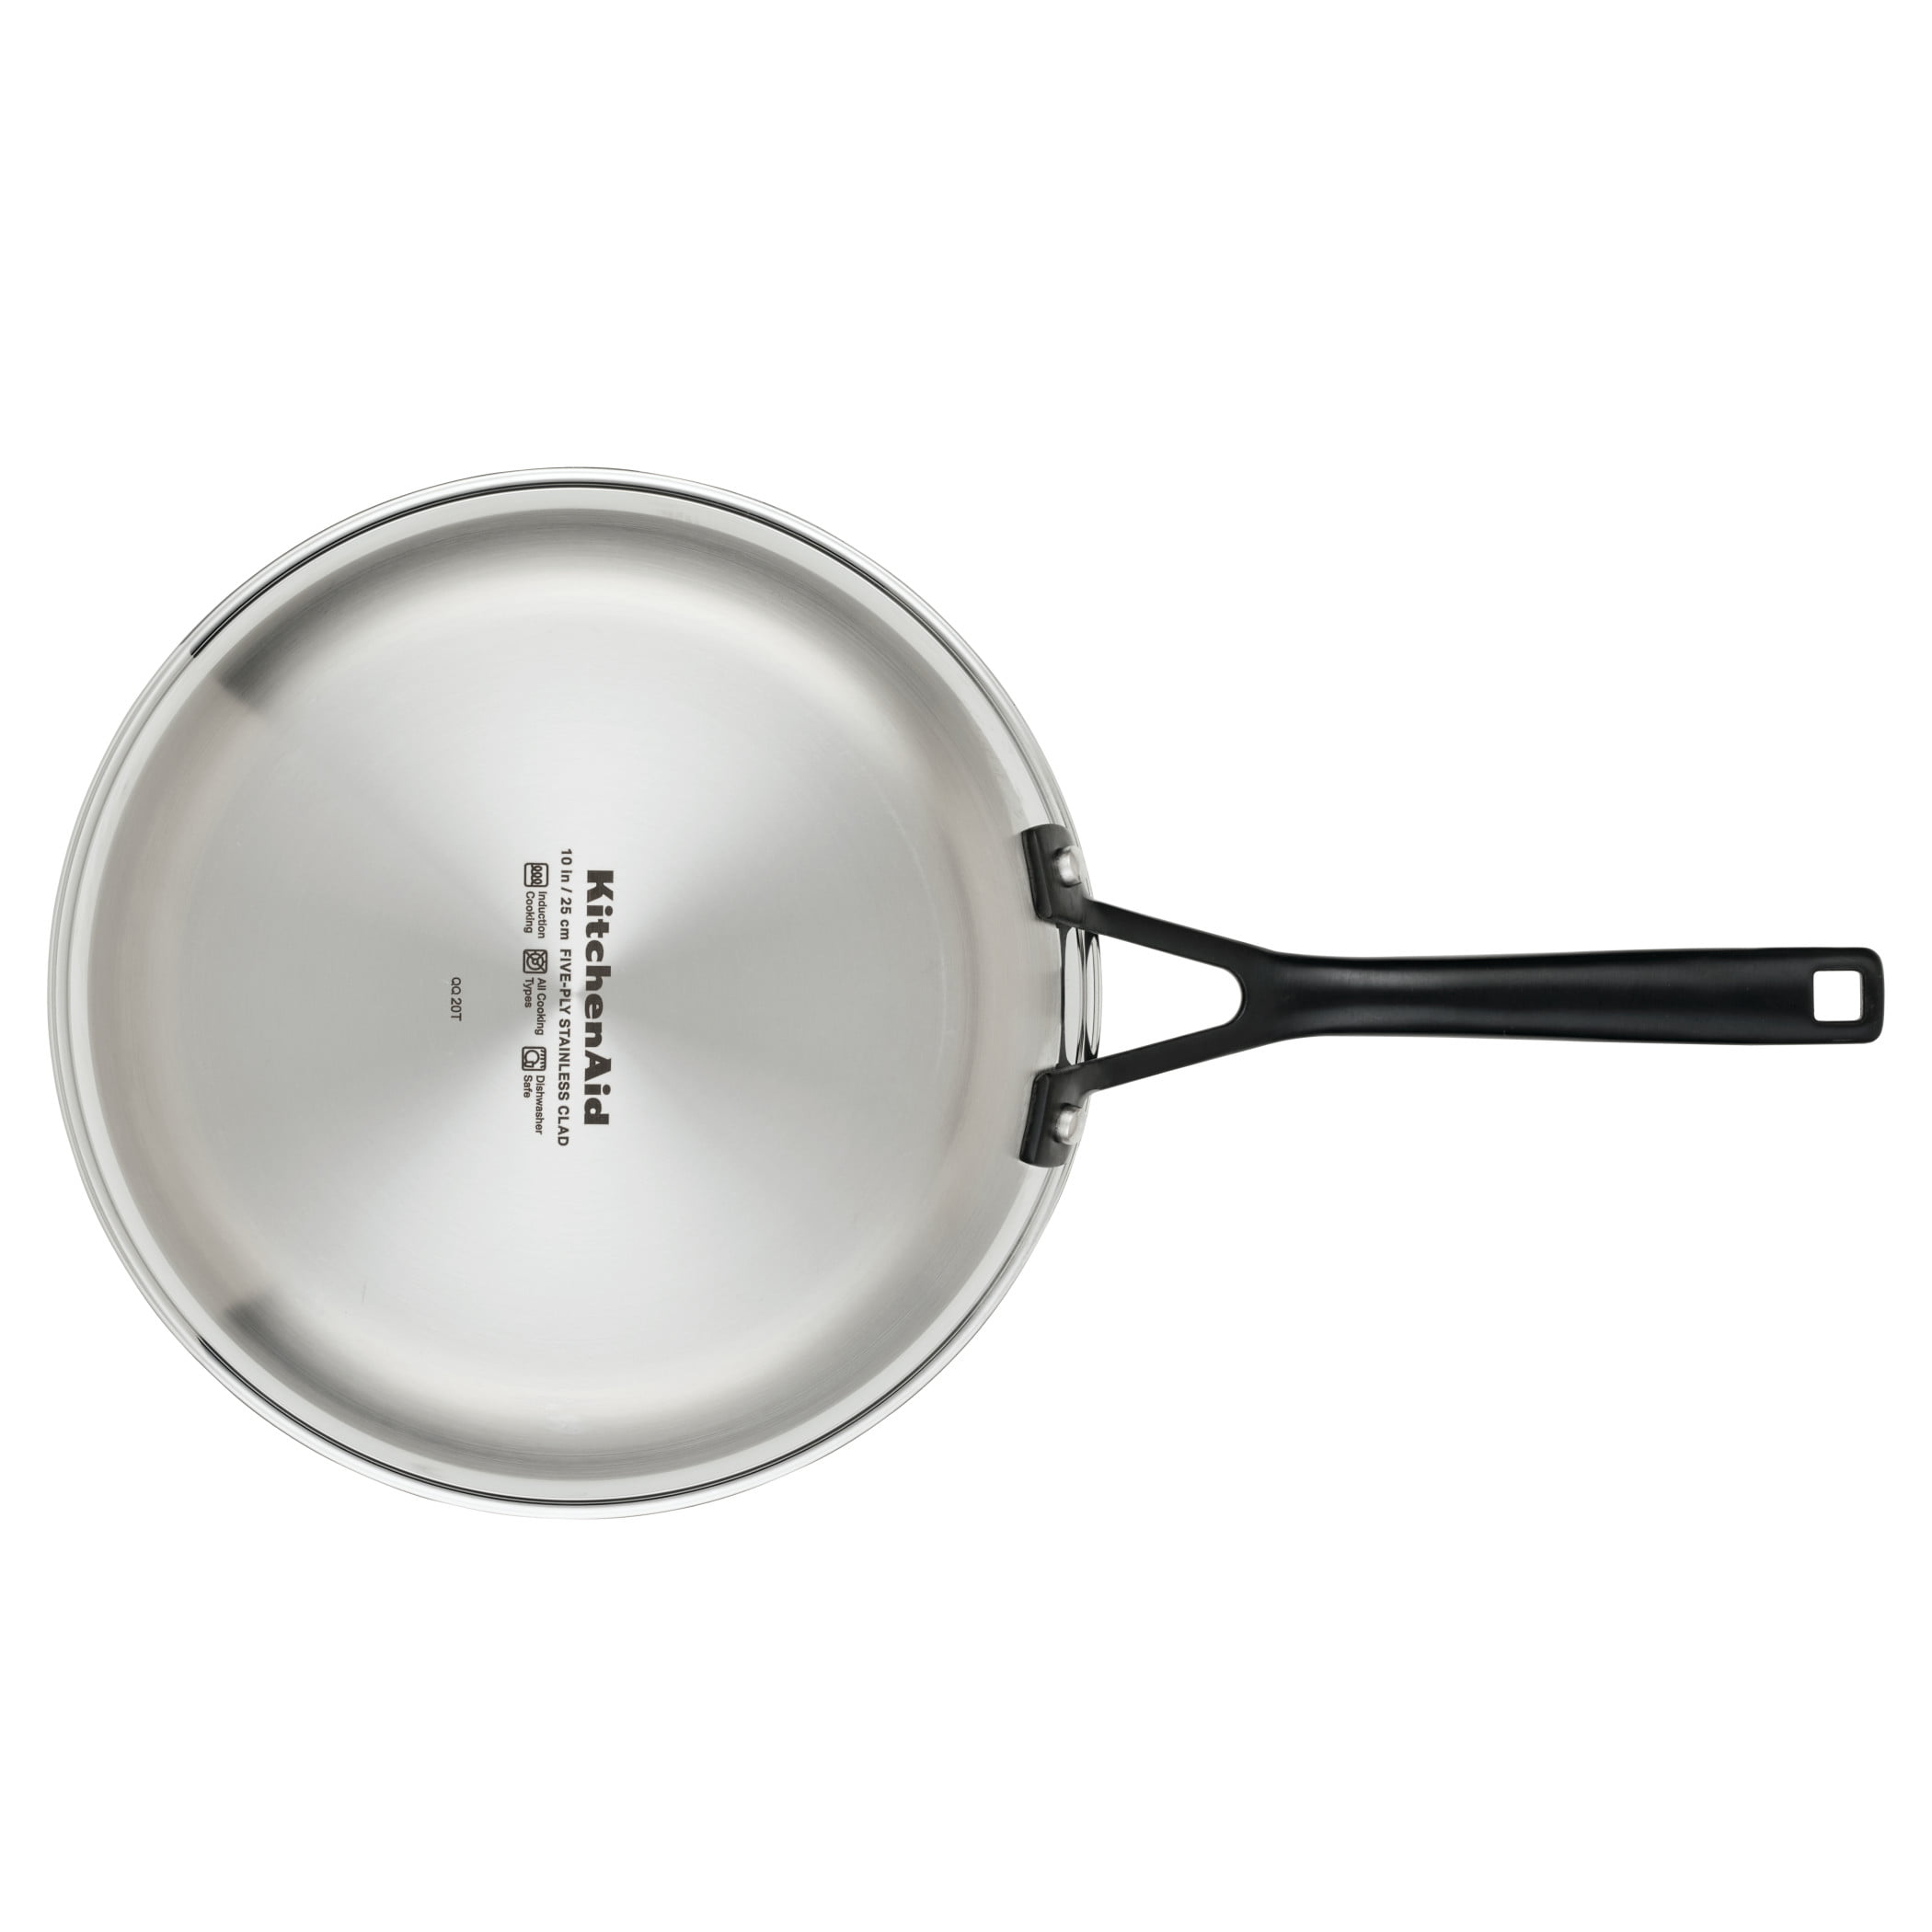 Kitchenaid 10 5-ply Clad Stainless Steel Induction Frying Pan